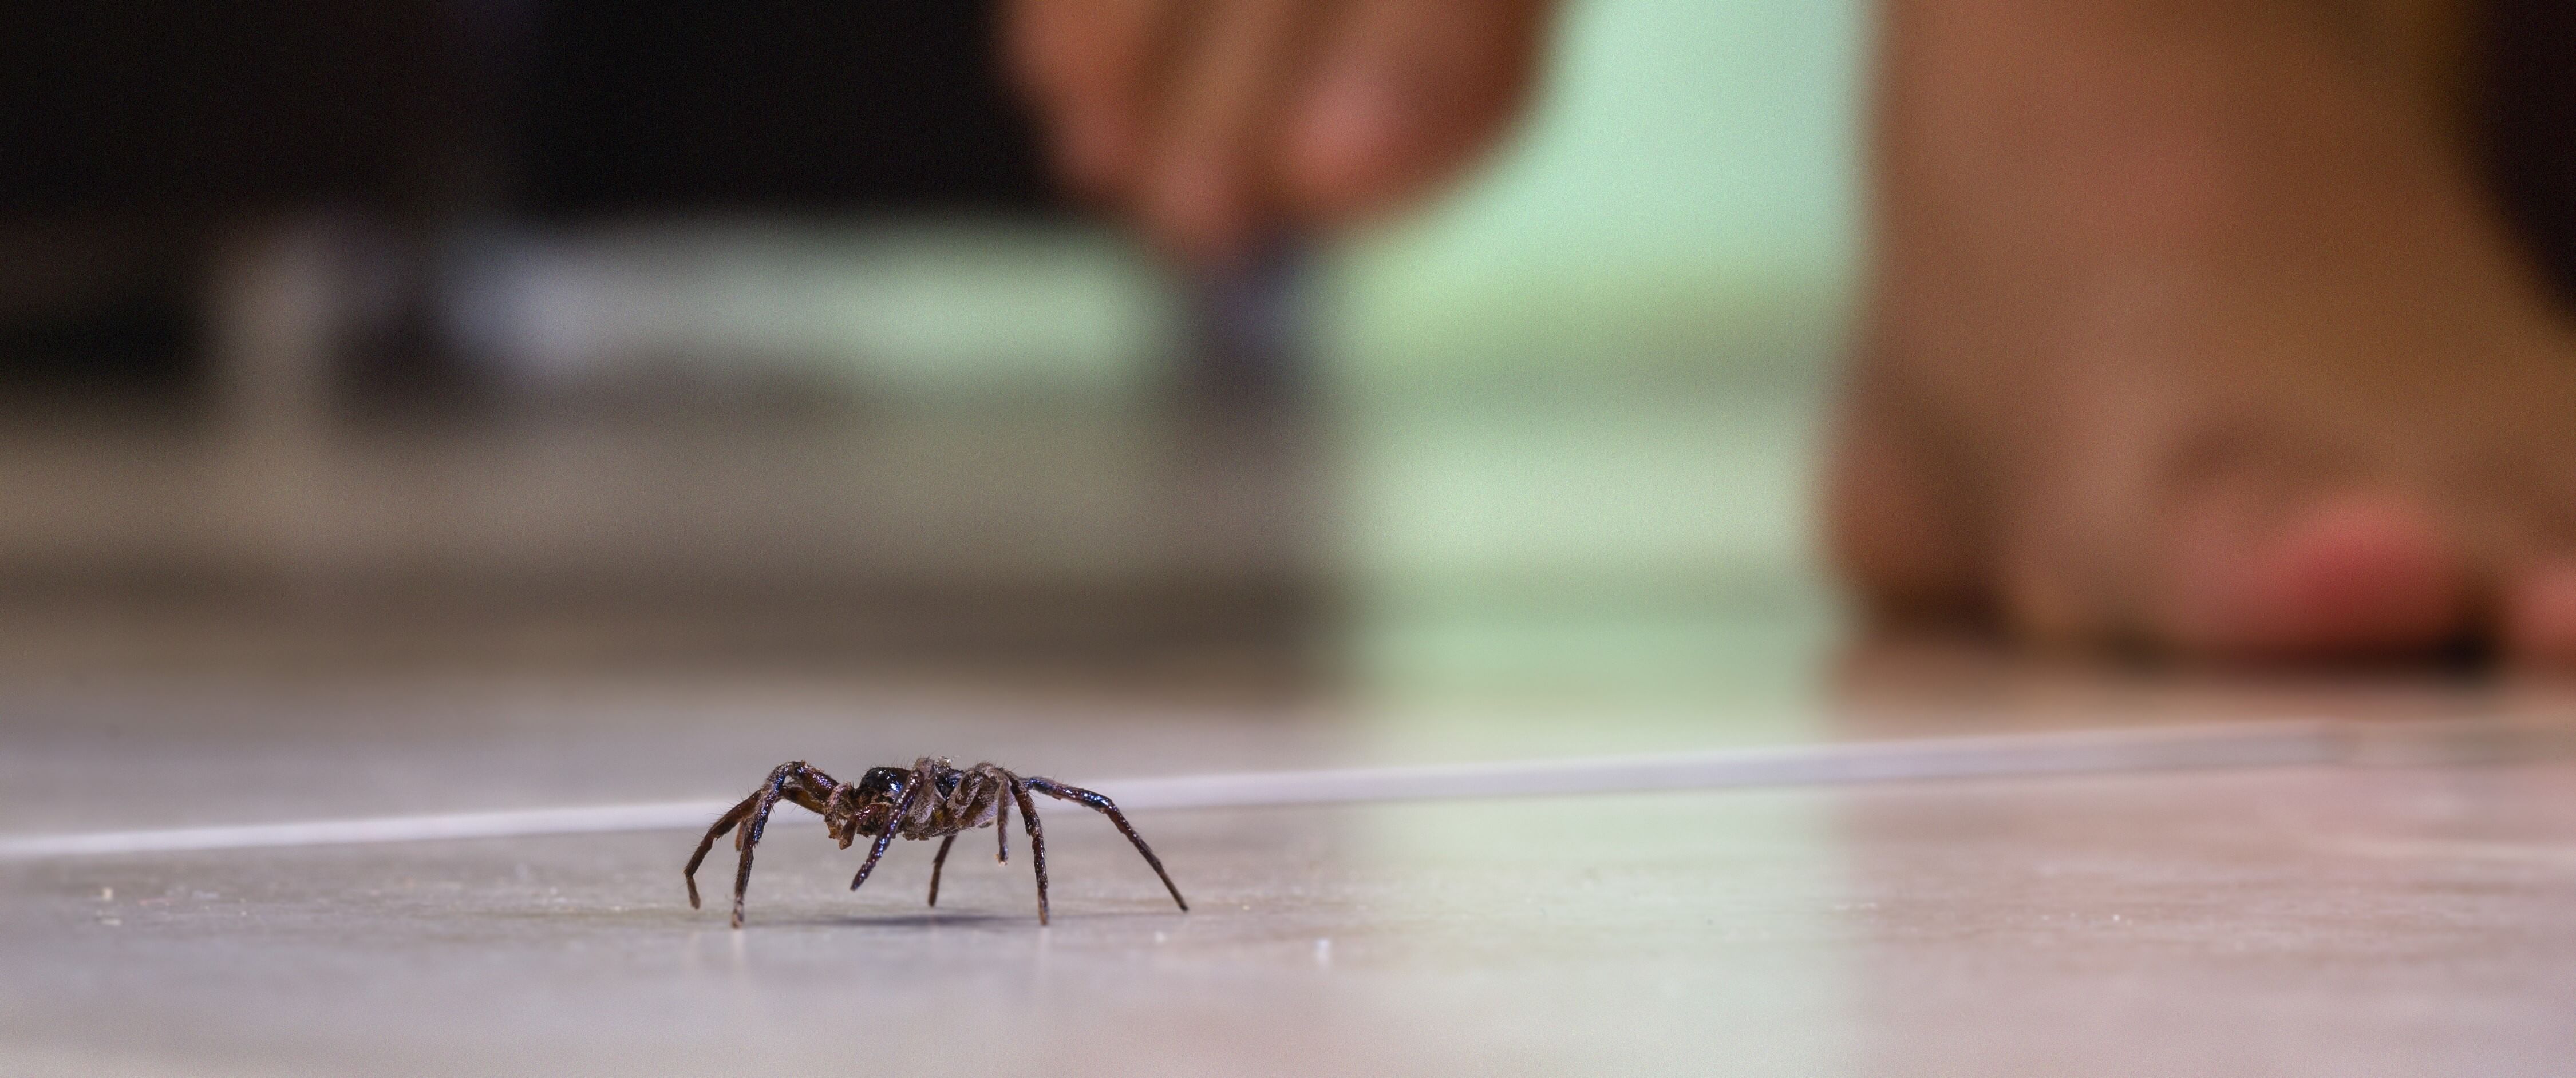 How to Treat Spider Bites at Home - Insight Pest Control